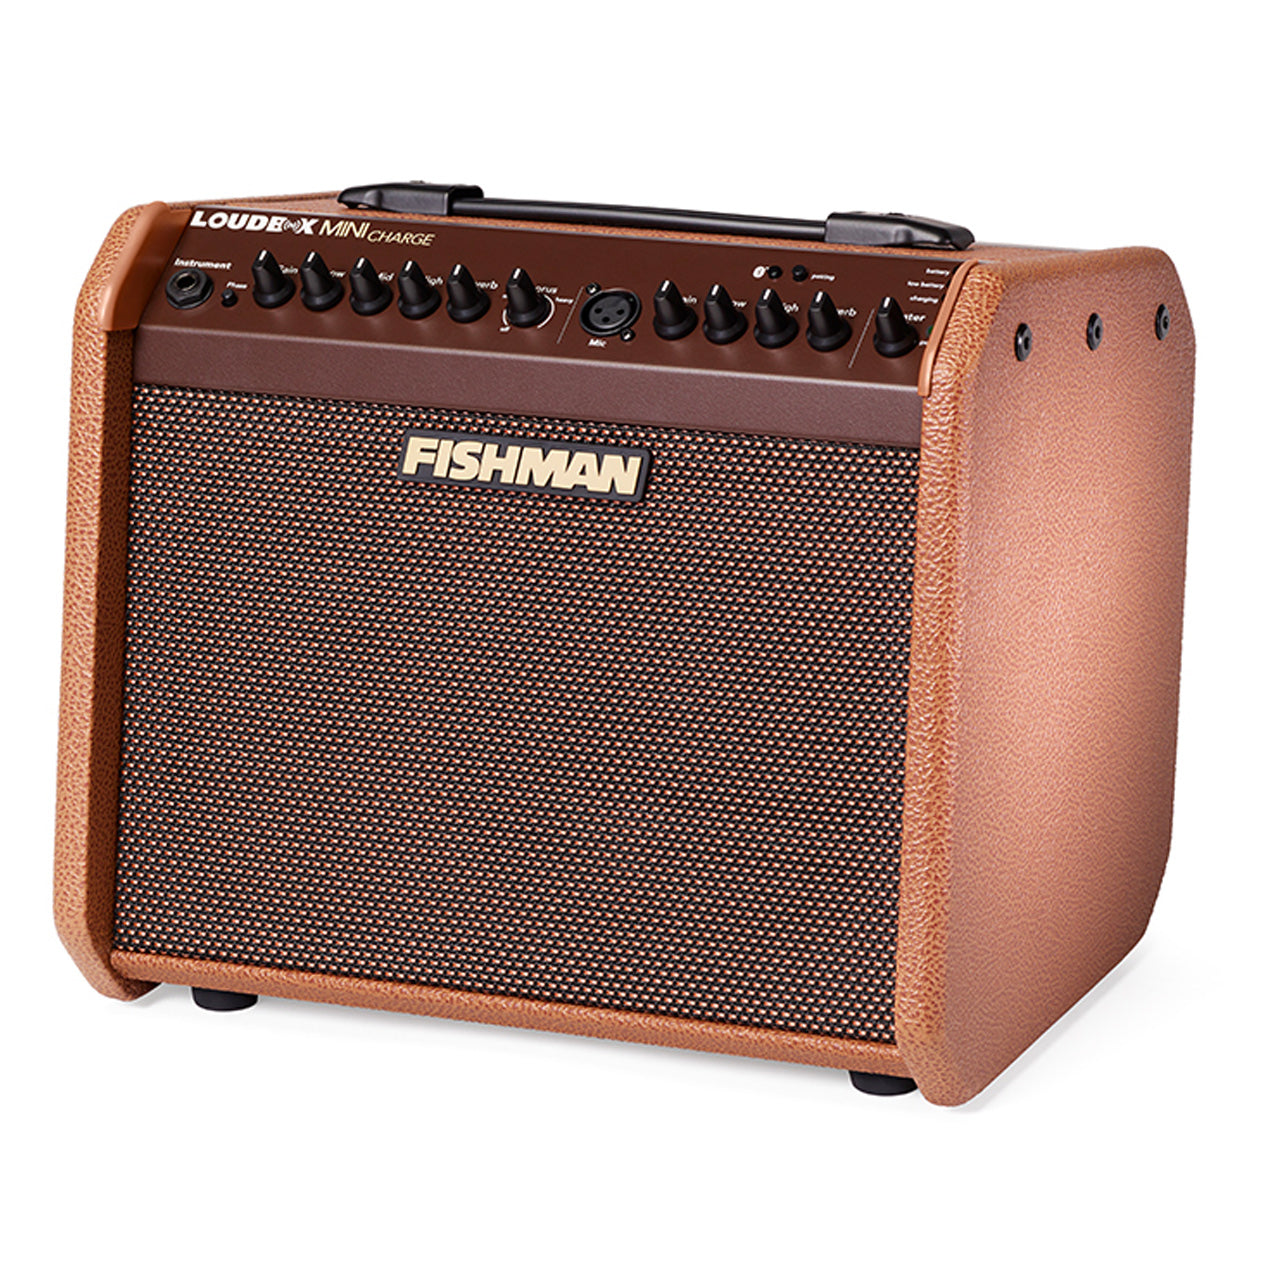 Fishman Loudbox Mini Charge Battery-Powered Acoustic Instrument 